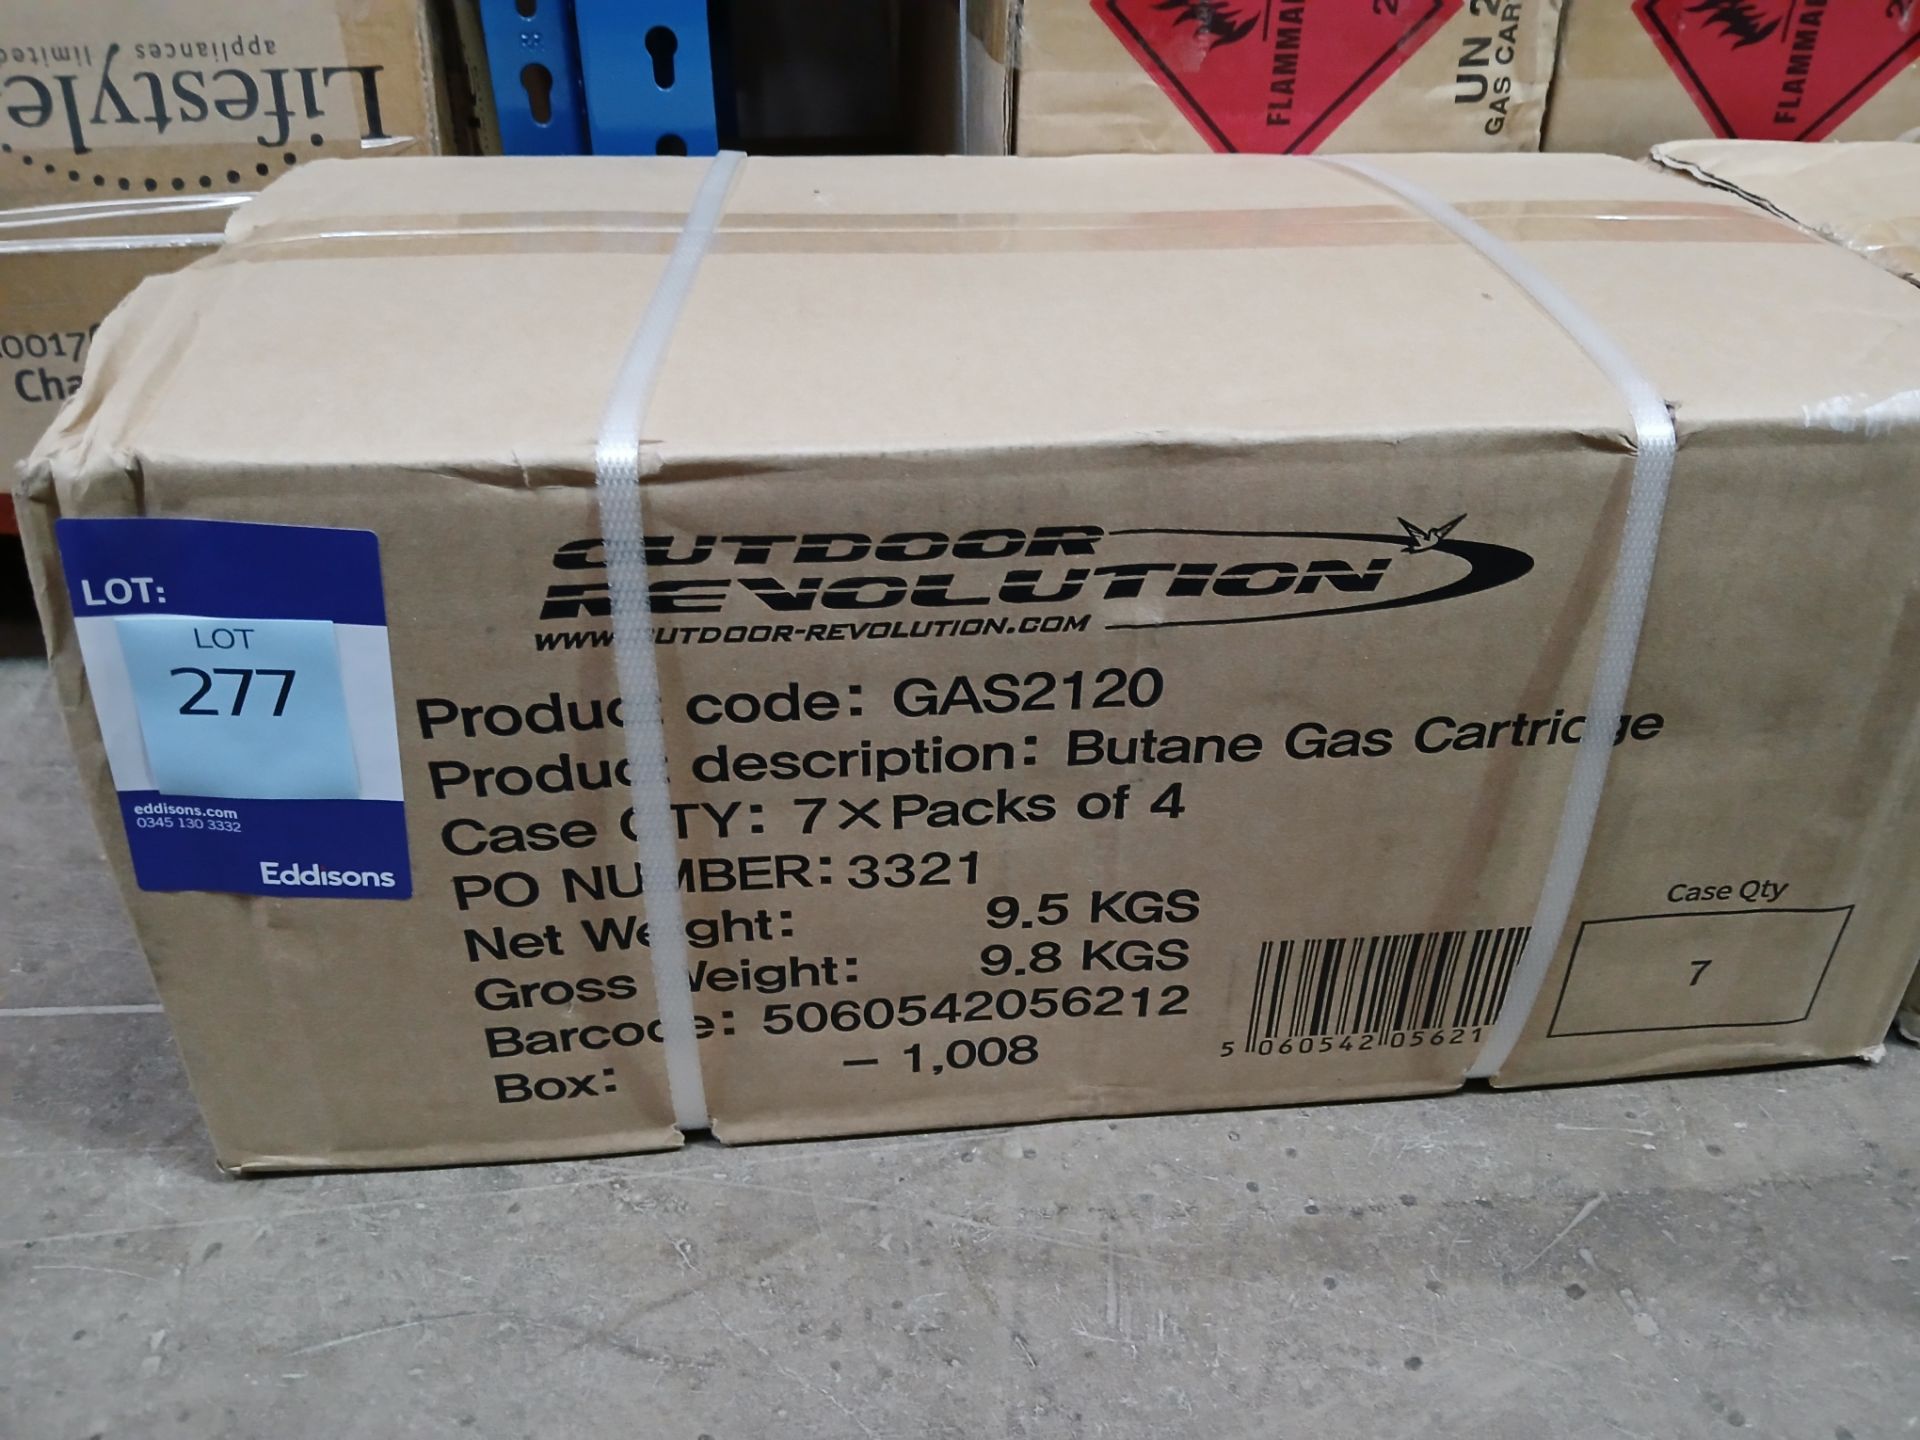 Outdoor Revolution GAS2120 Butane Gas Cartridges, 7 Packs of 4 (Please note, Viewing Strongly